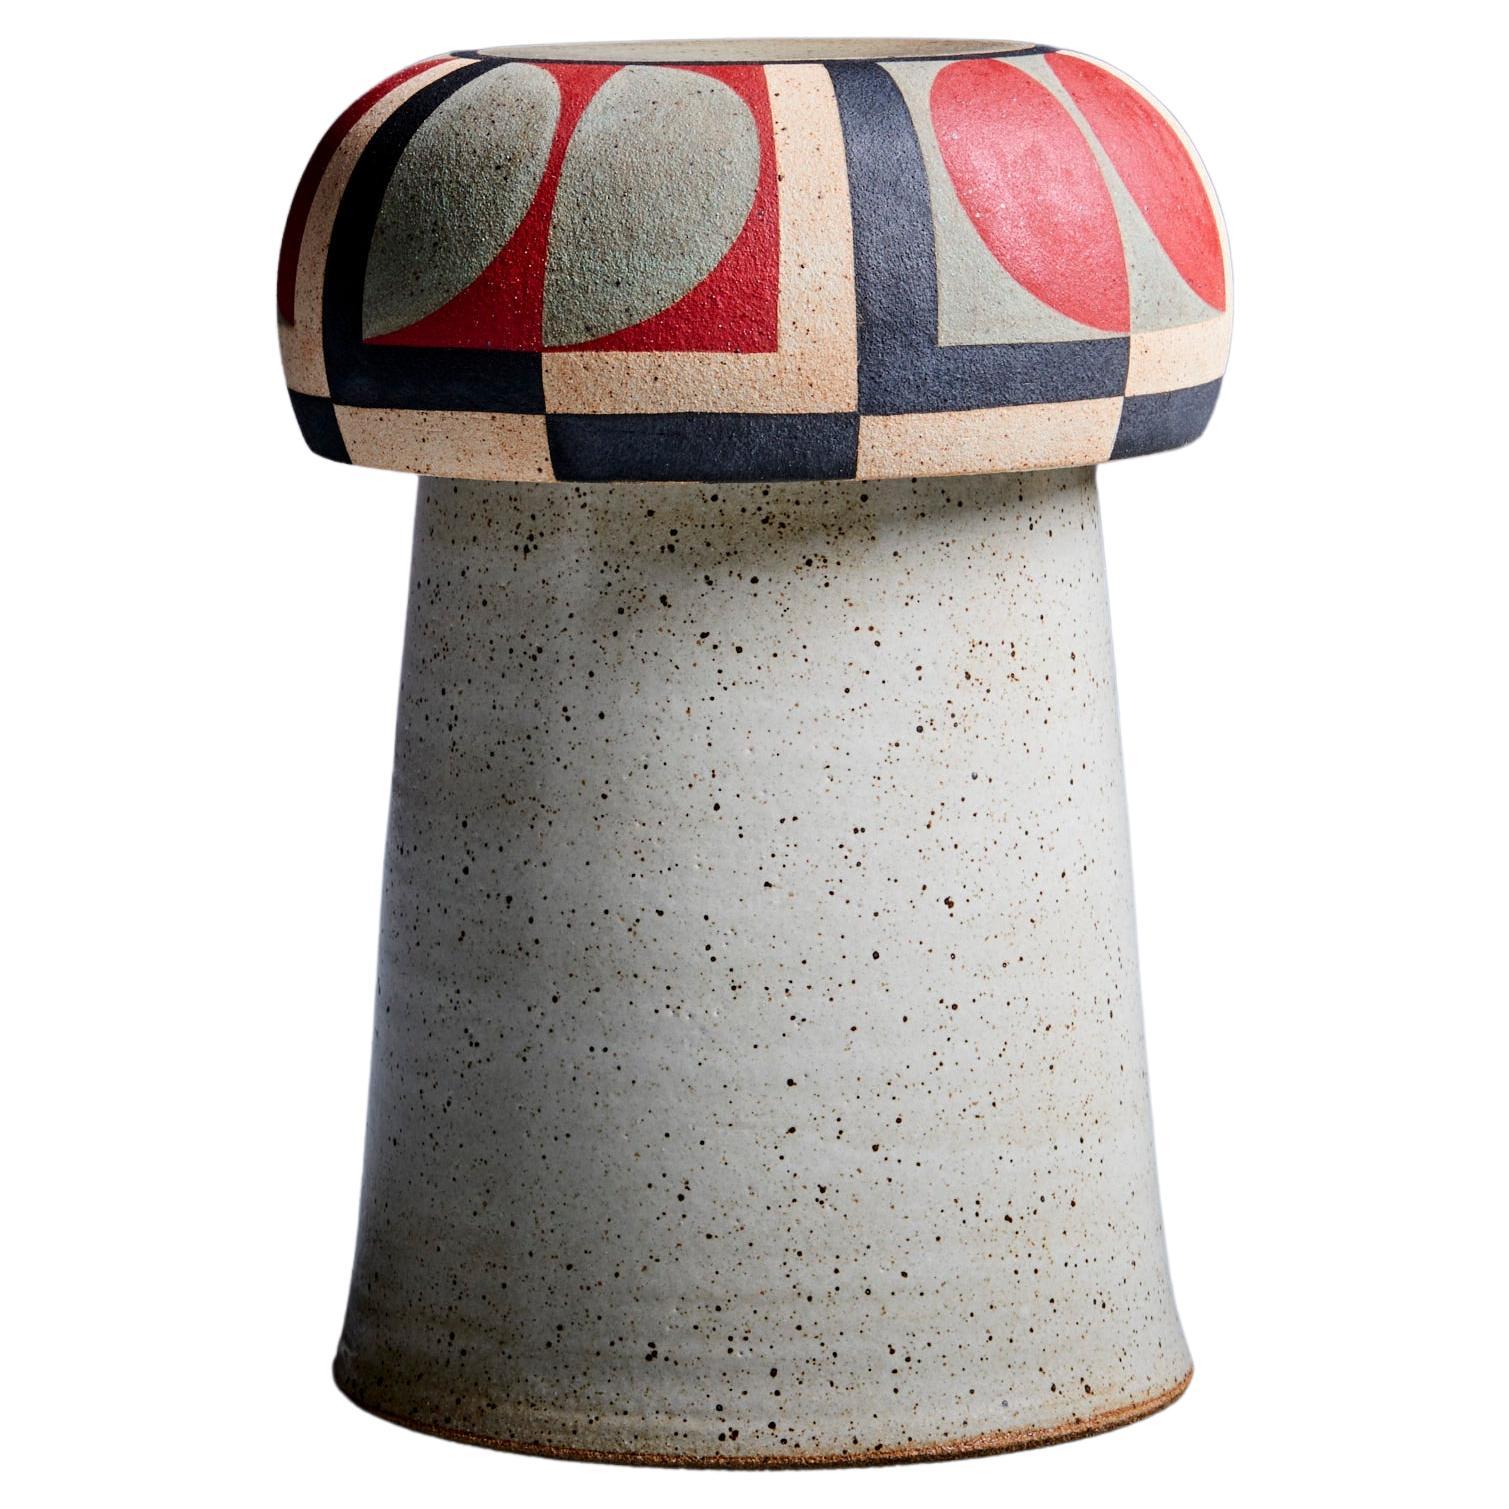 Kat and Roger hand-painted Studio ceramic stool For Sale